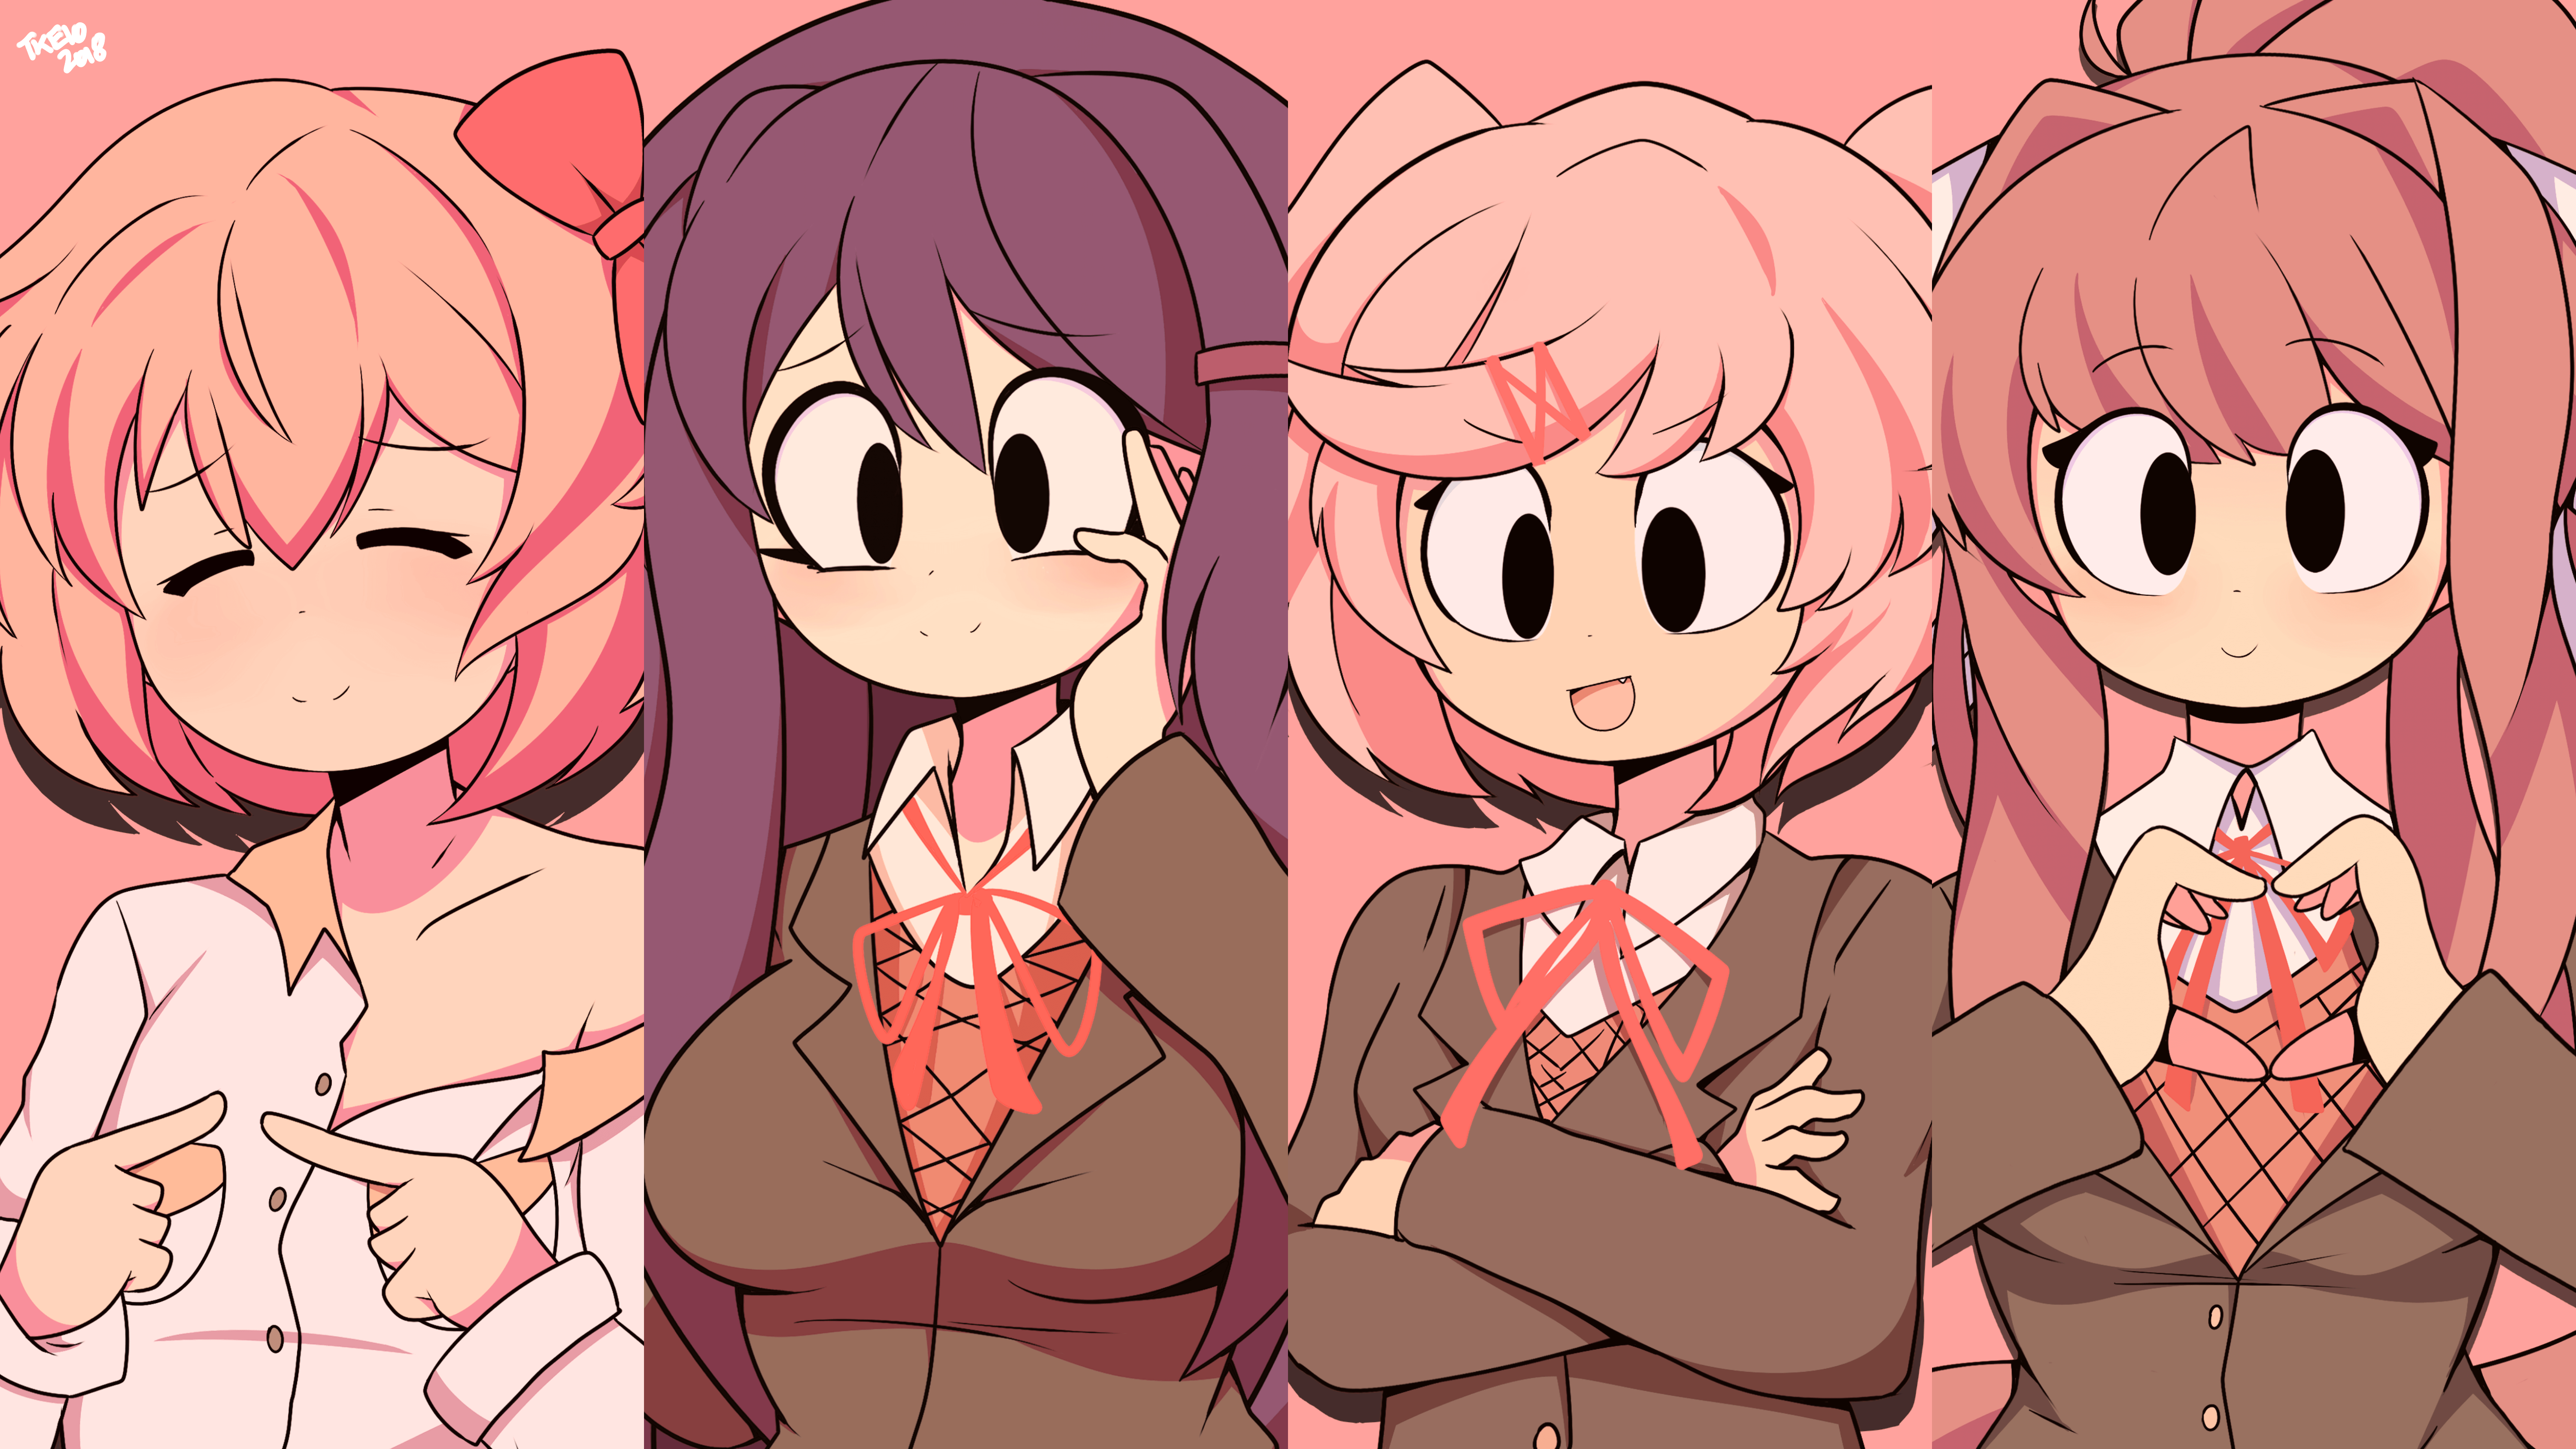 Here's a wallpaper version of the Dokis